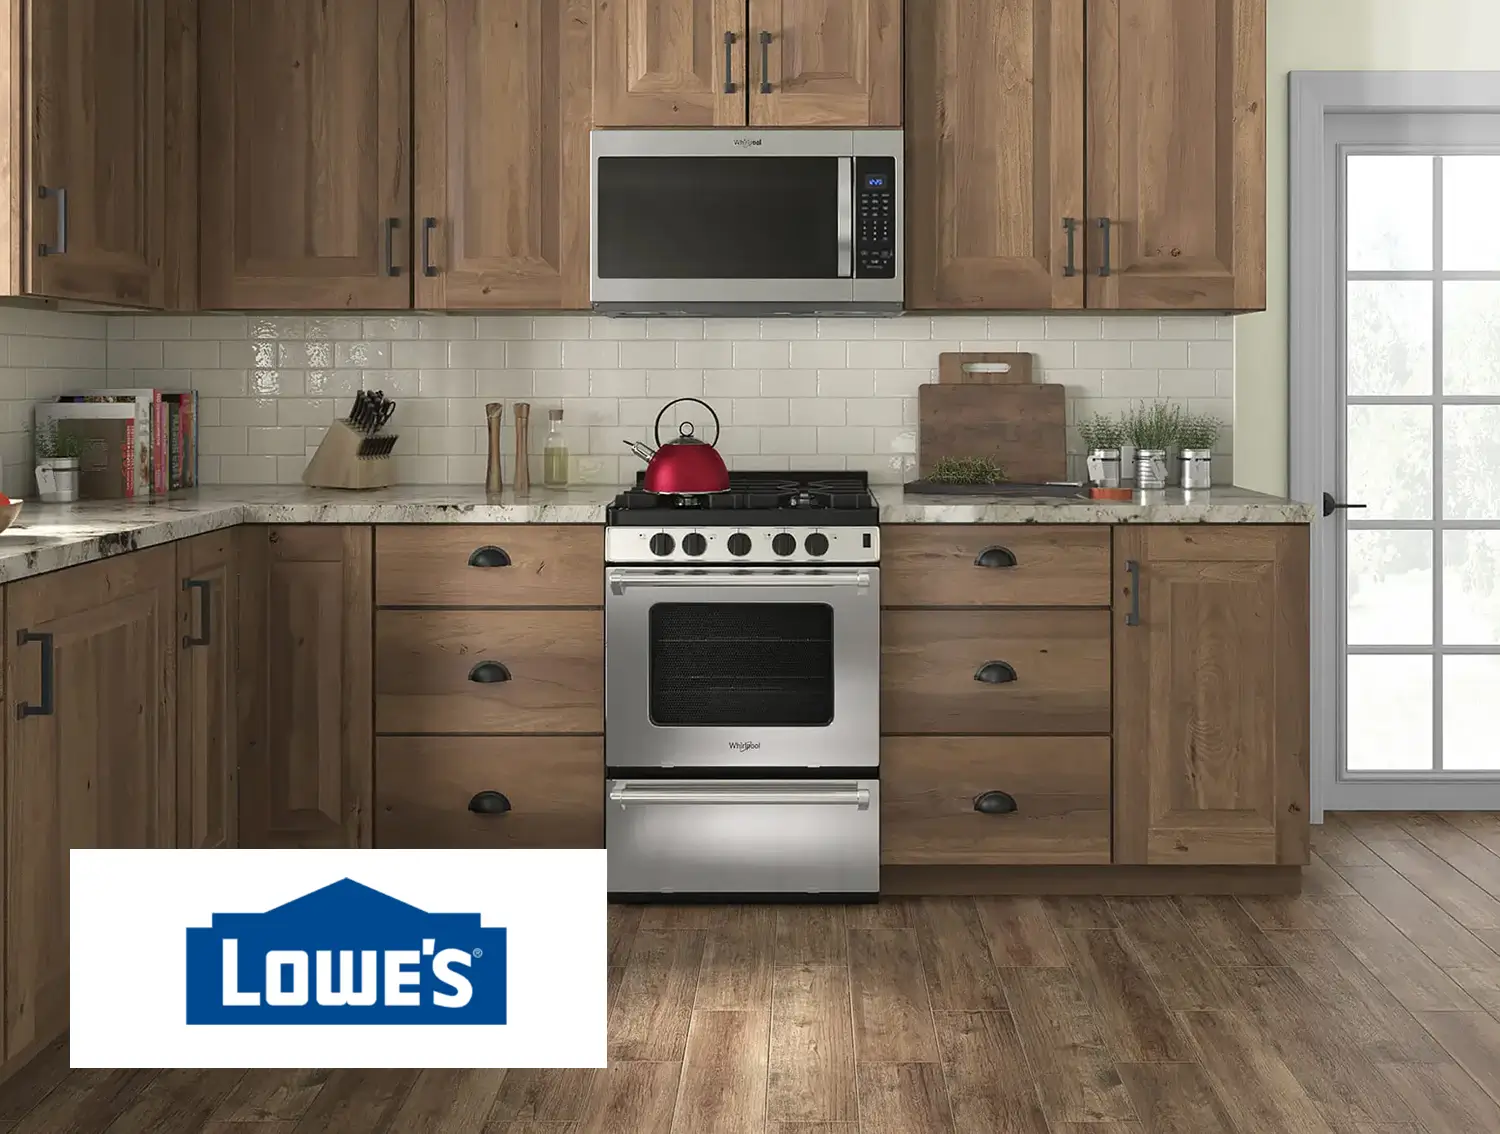 Our Customized Approach Improved Lowe’s Appliance Marketing with 3D Visuals